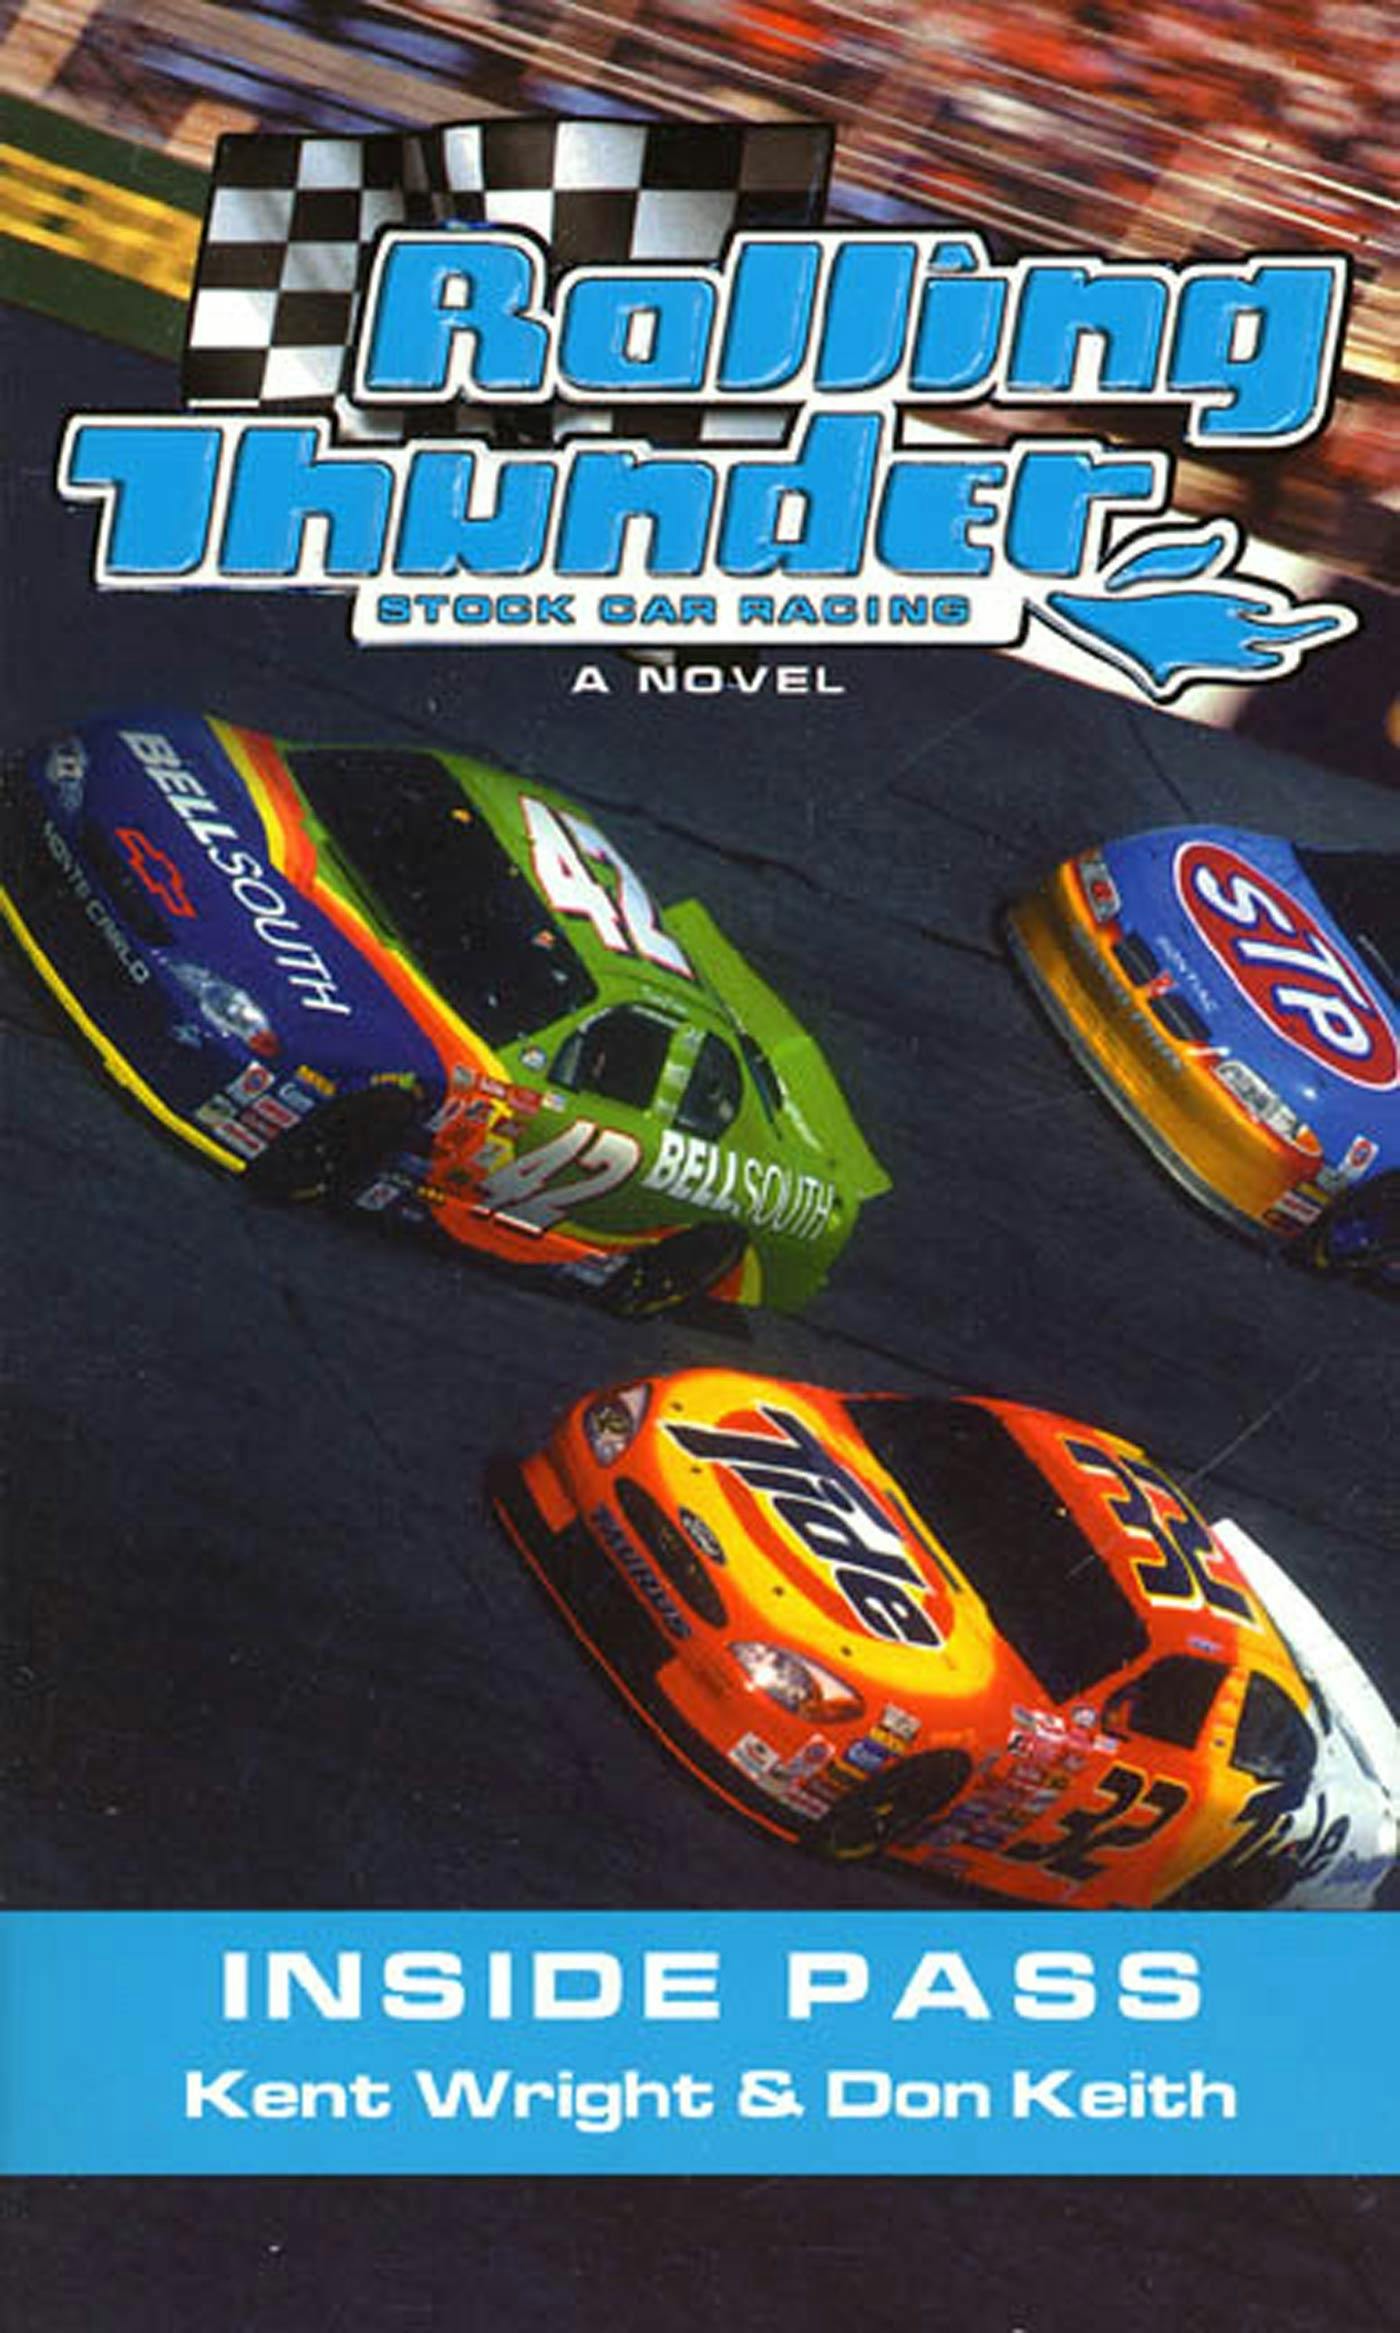 Cover for the book titled as: Rolling Thunder Stock Car Racing: Inside Pass